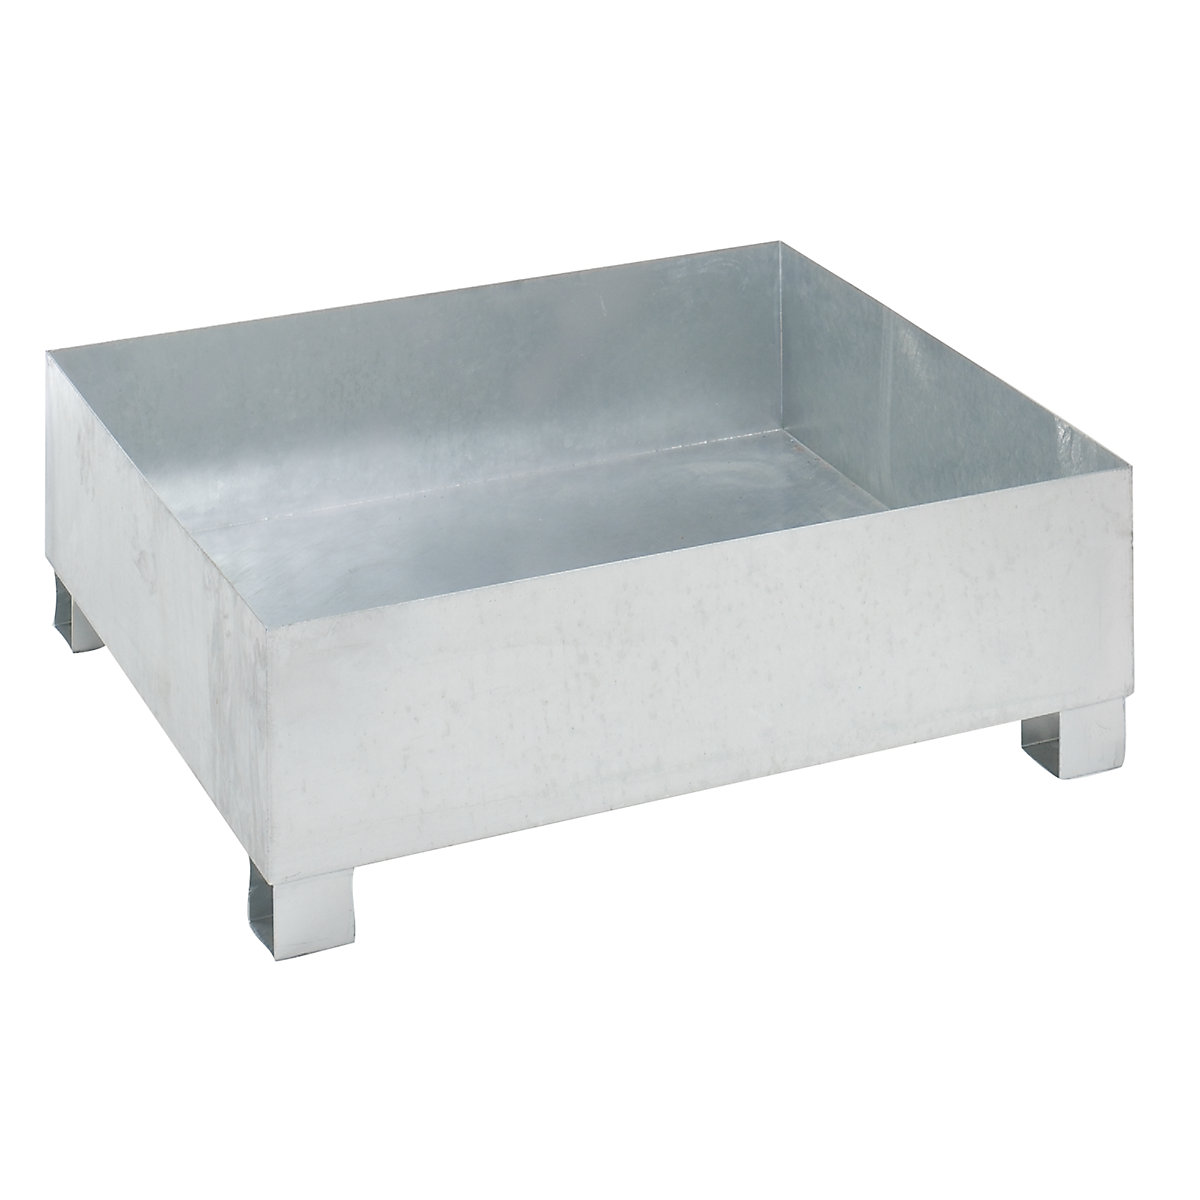 Steel sump tray for 200 l drums – eurokraft basic, LxWxH 1200 x 1200 x 415 mm, with certification, hot dip galvanised, without grate-3